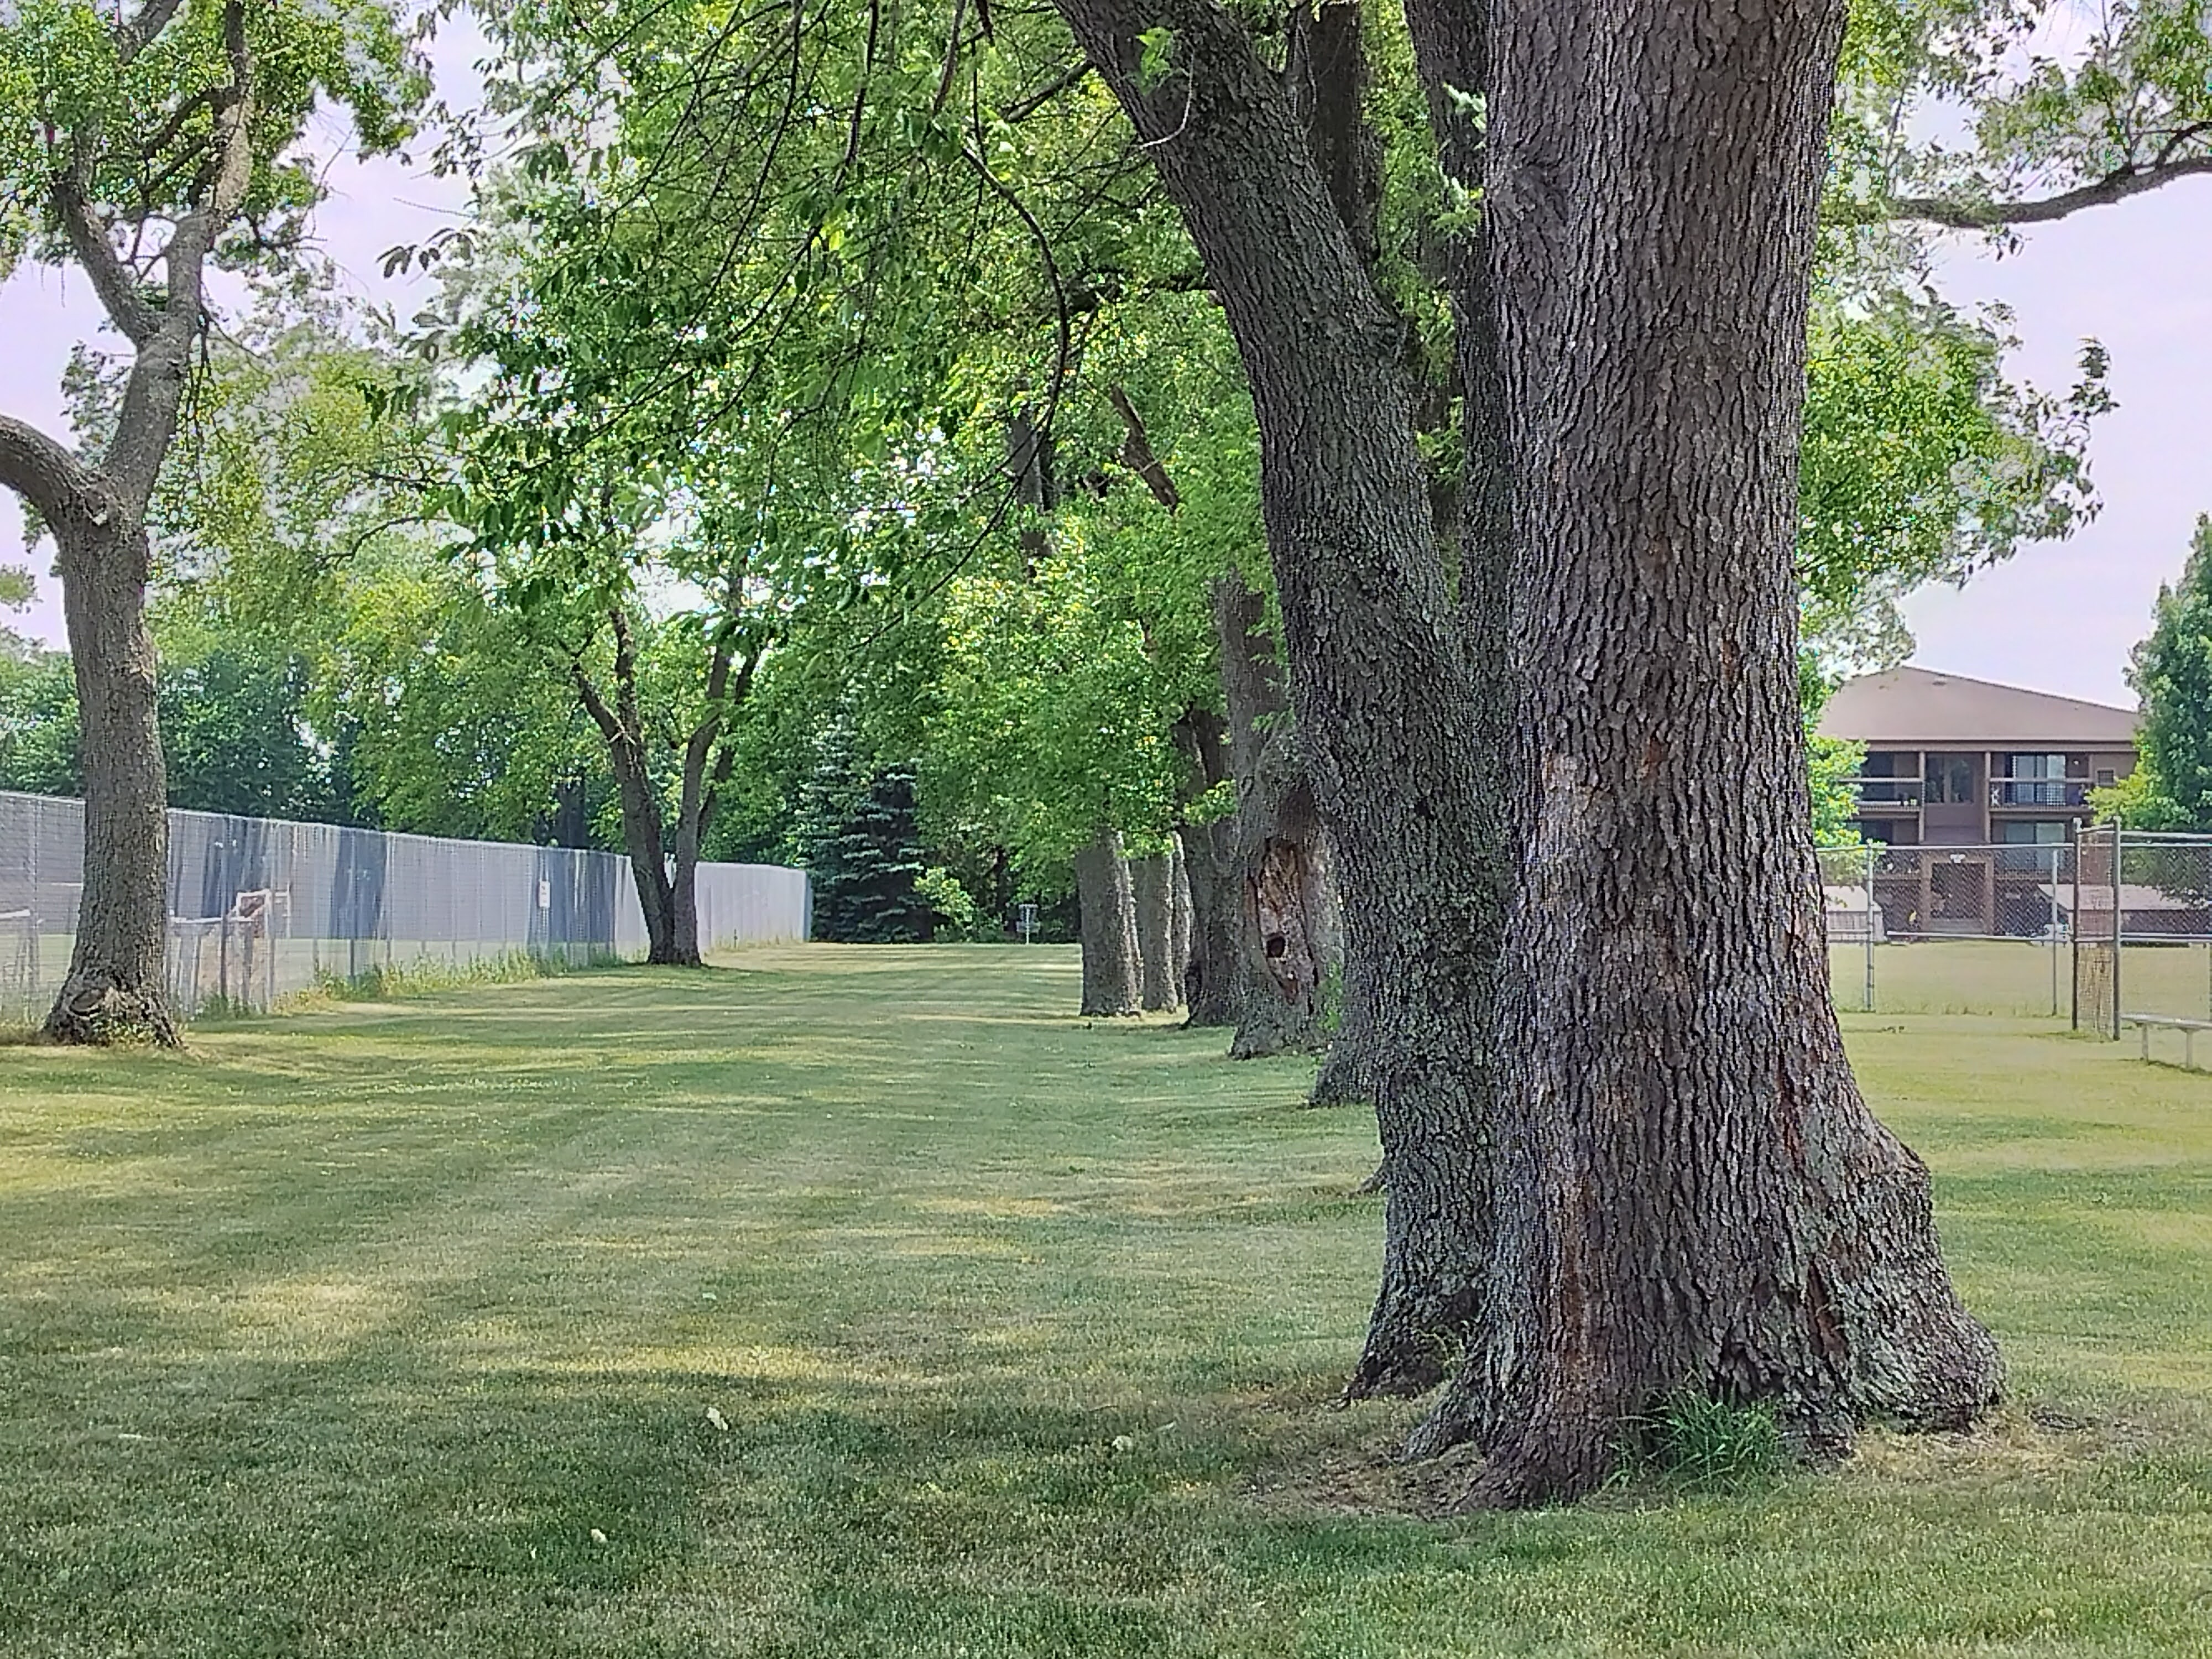 Photo of trees in a park taken with the OnePlus Nord N30 5G.